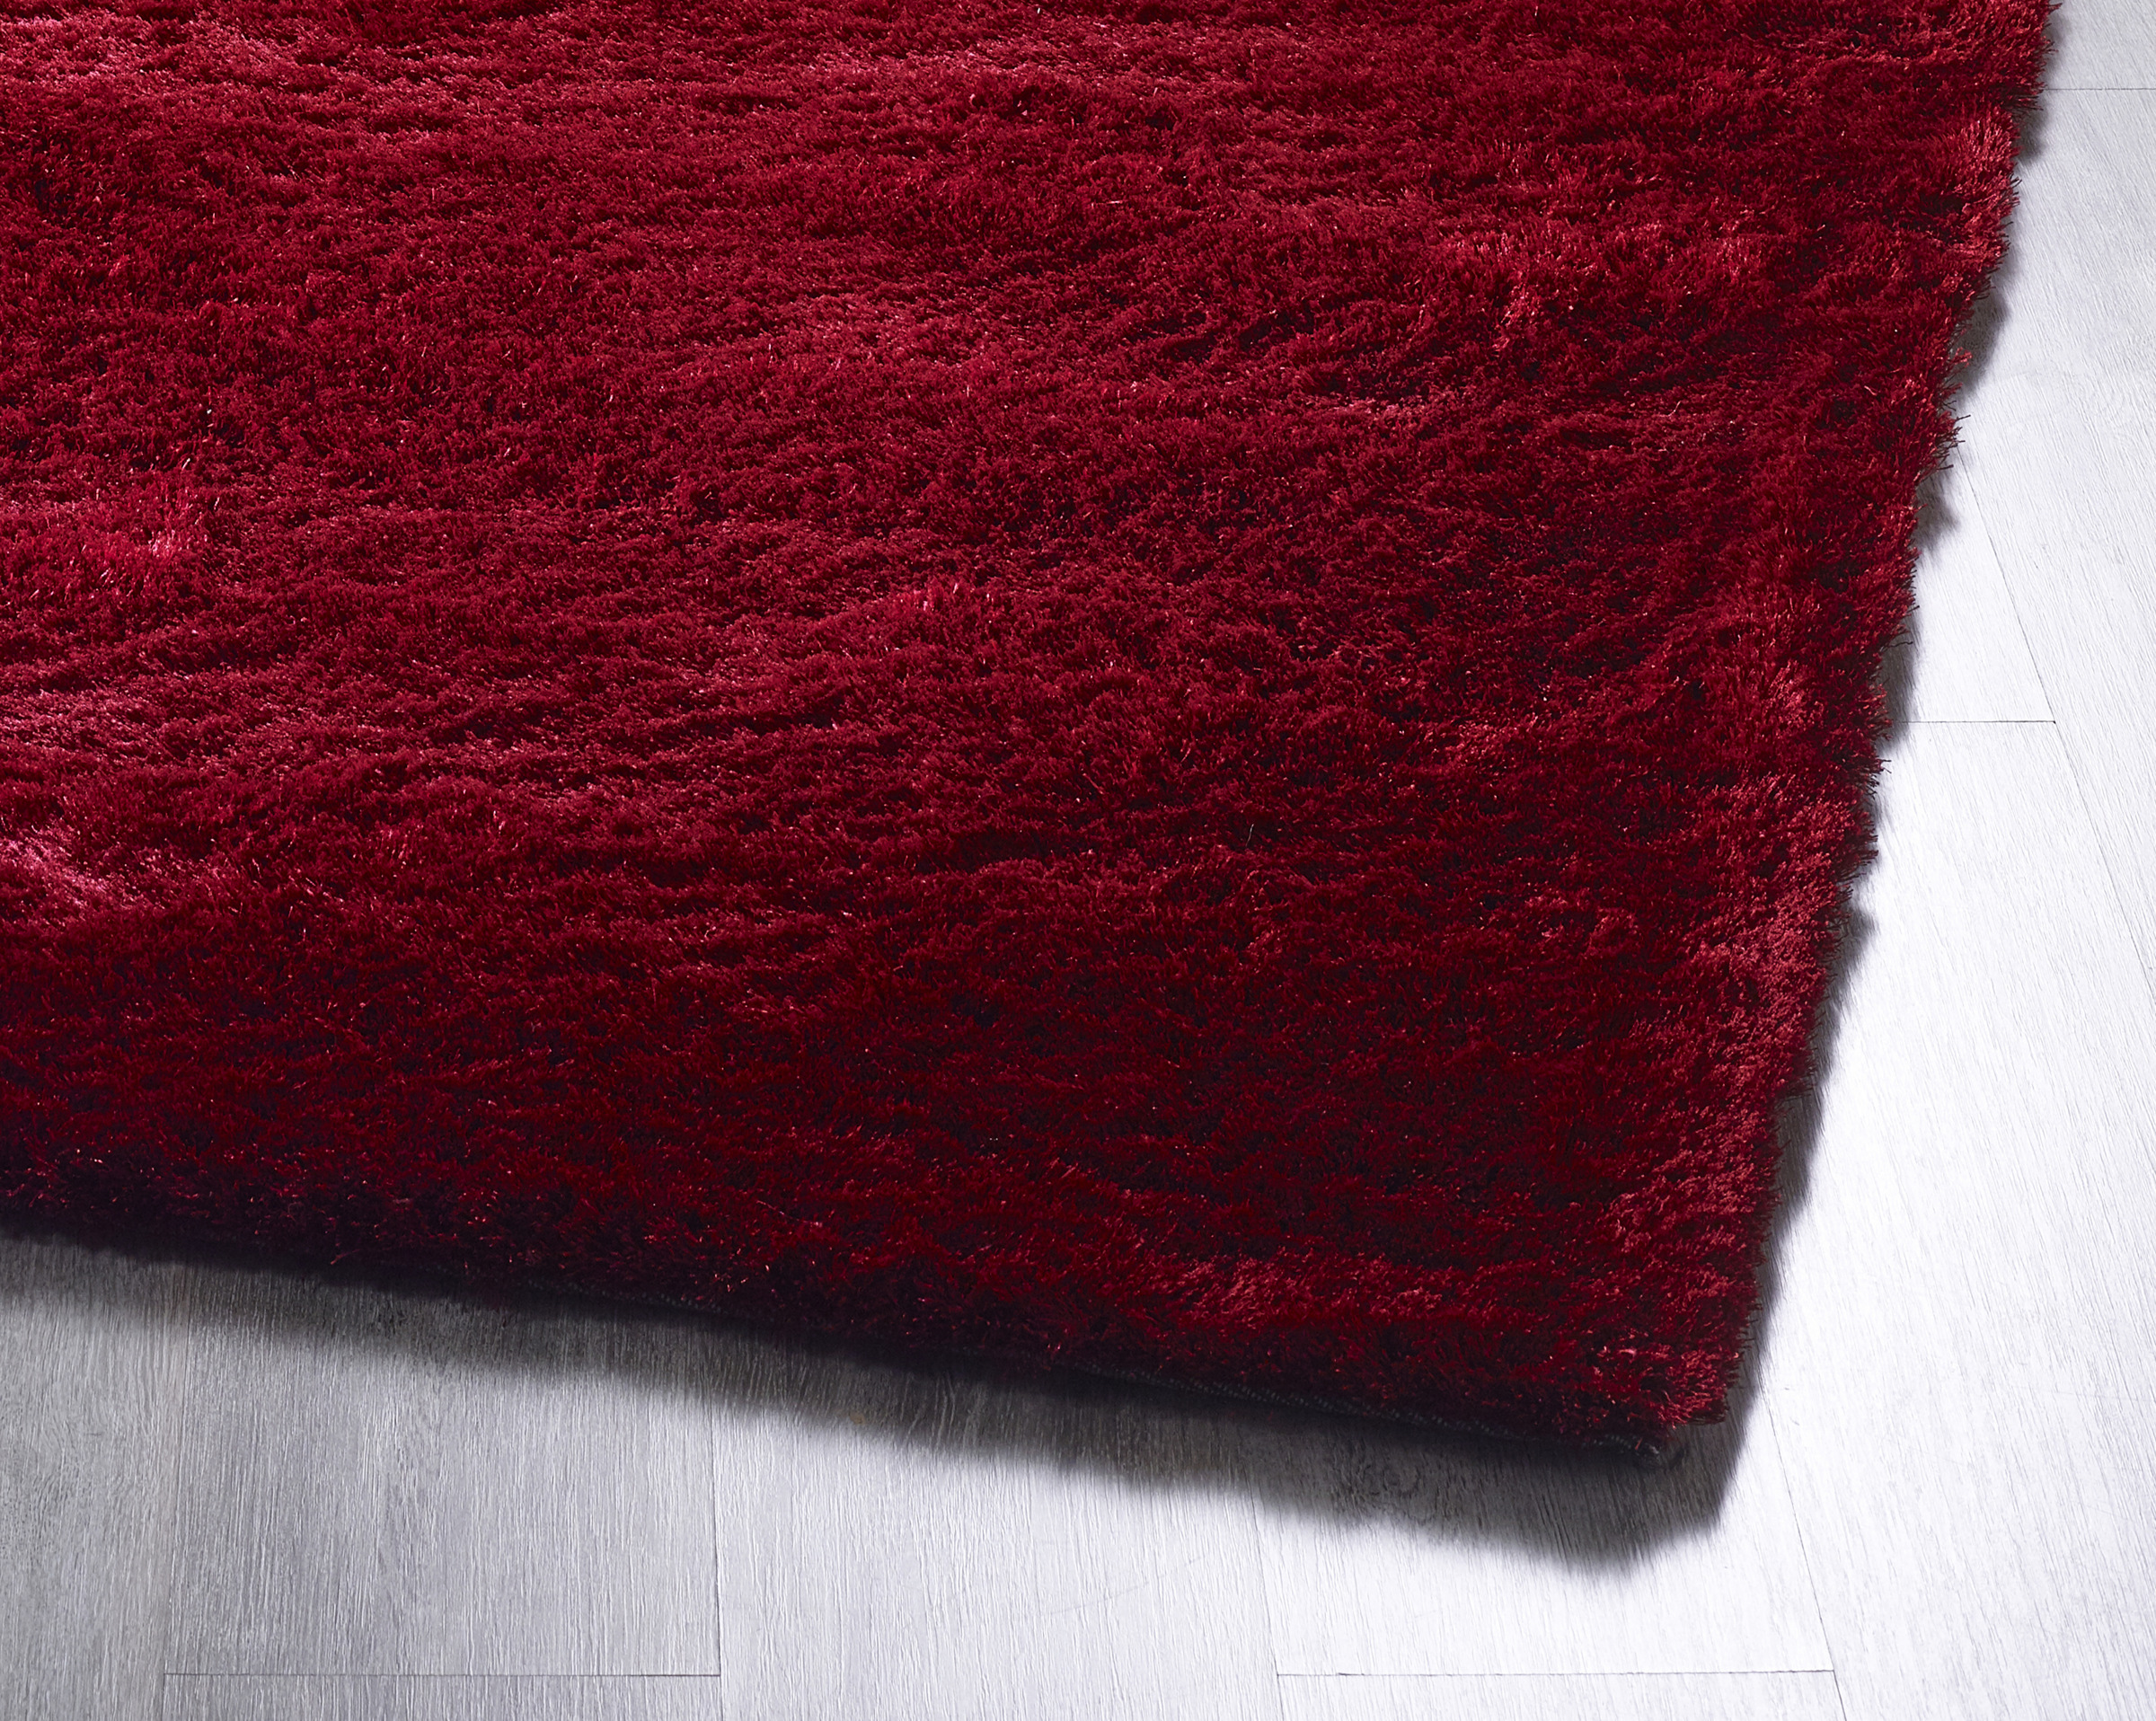 Glamour Red 80cm x 150cm Shaggy UK Mainland Free Shipping